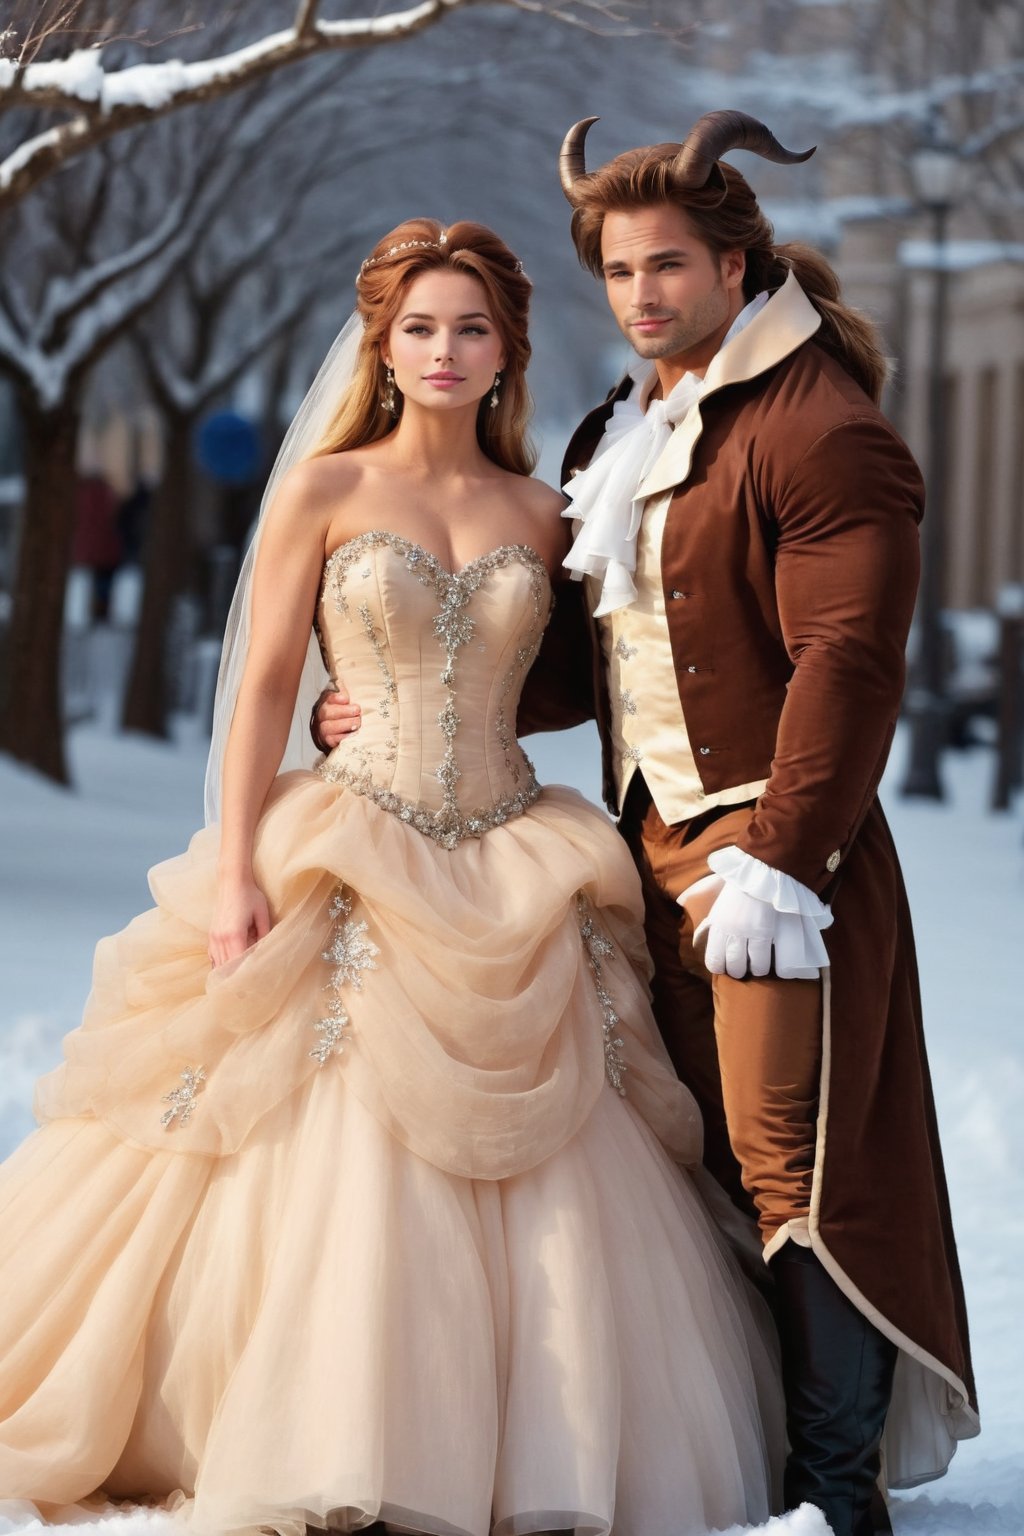 (Manhattan streets:1.3) 1girl, 1boy, full body bridal photograph of Lyr1cl3igh (with groom Josh Holloway:1.2), tiara, W3dd1ng, blonde romantic half up half down bridal hairstyle, veil, (brown 3 piece suit:1.9), front view, strapless, ice blue crystal embellished corset bodice, basque waist, (beauty and the beast inspired:1.6),) (Gathered pickups:1.9) voluminous layered organza, split gathered silk overskirt, (hip swags:0.8), pannier inspired, embroidered lace underskirt, beaded embroidery, 3d appliques, side view, (ivory ball gown:1.2), draping, ivory opera gloves, bustled back, dramatic train, standing, winter, snow<lora:EMS-256742-EMS:1.000000>, <lora:EMS-324197-EMS:1.000000>, <lora:EMS-306915-EMS:0.800000>